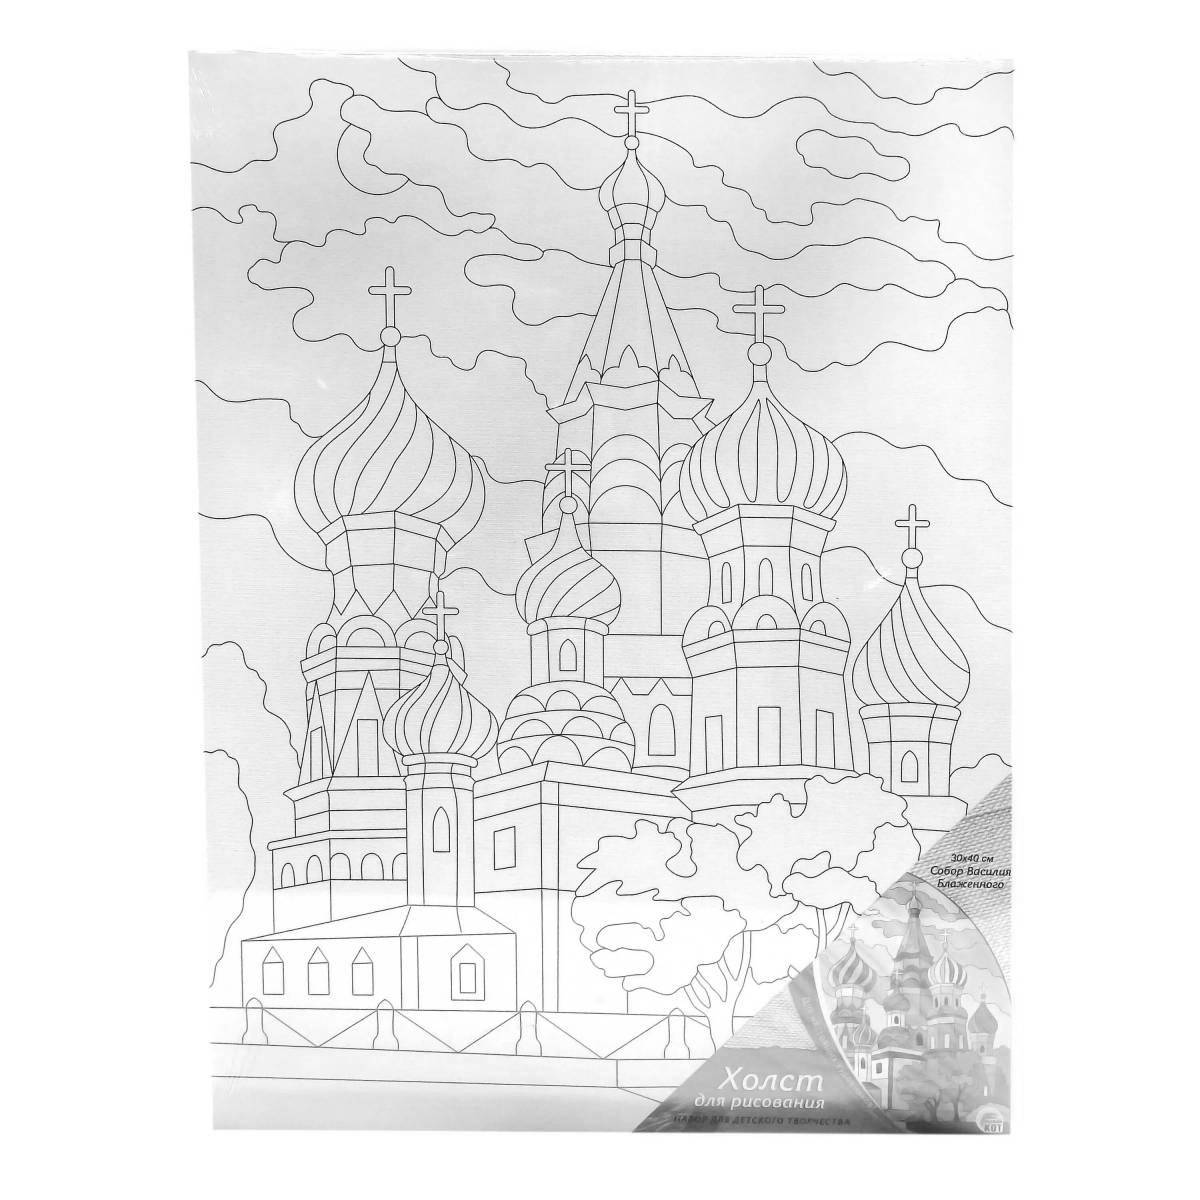 Coloring page shining st basil's cathedral